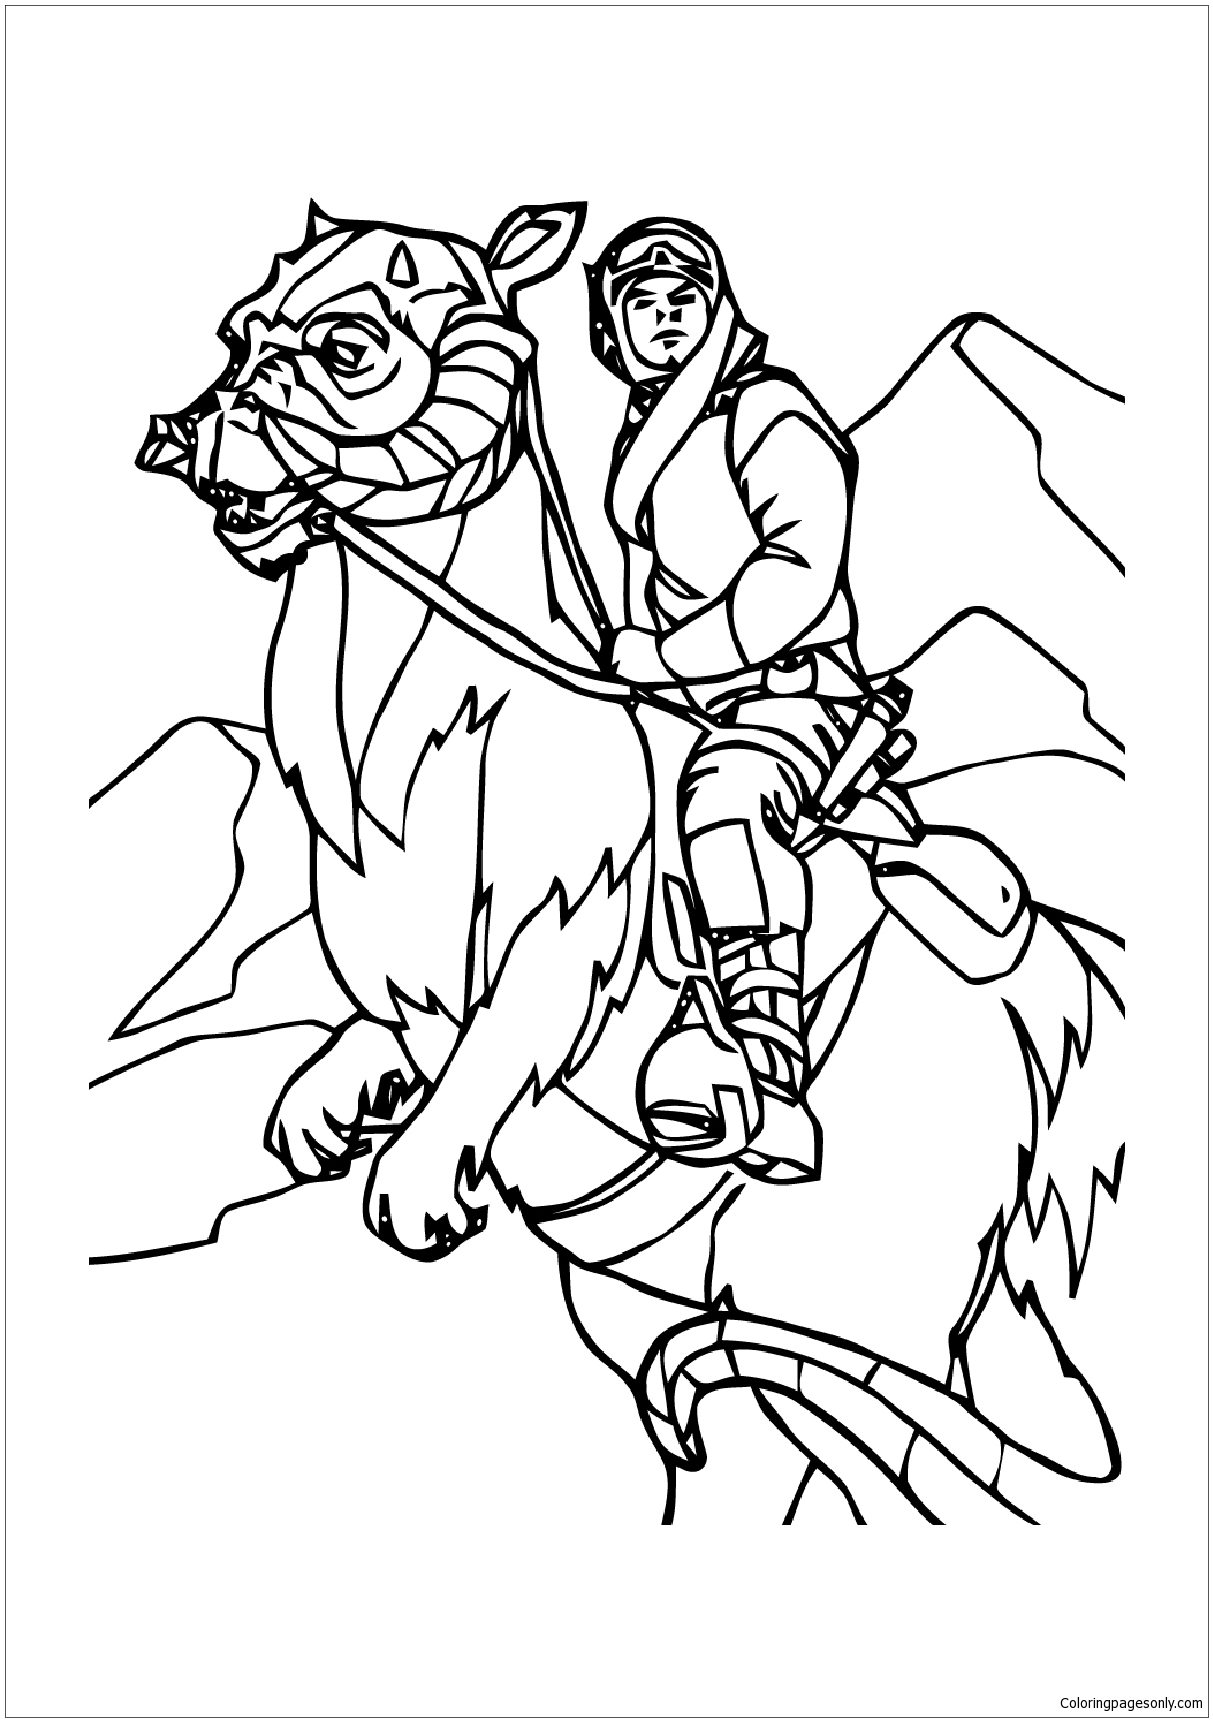 Funny Star Wars 1 Coloring Pages